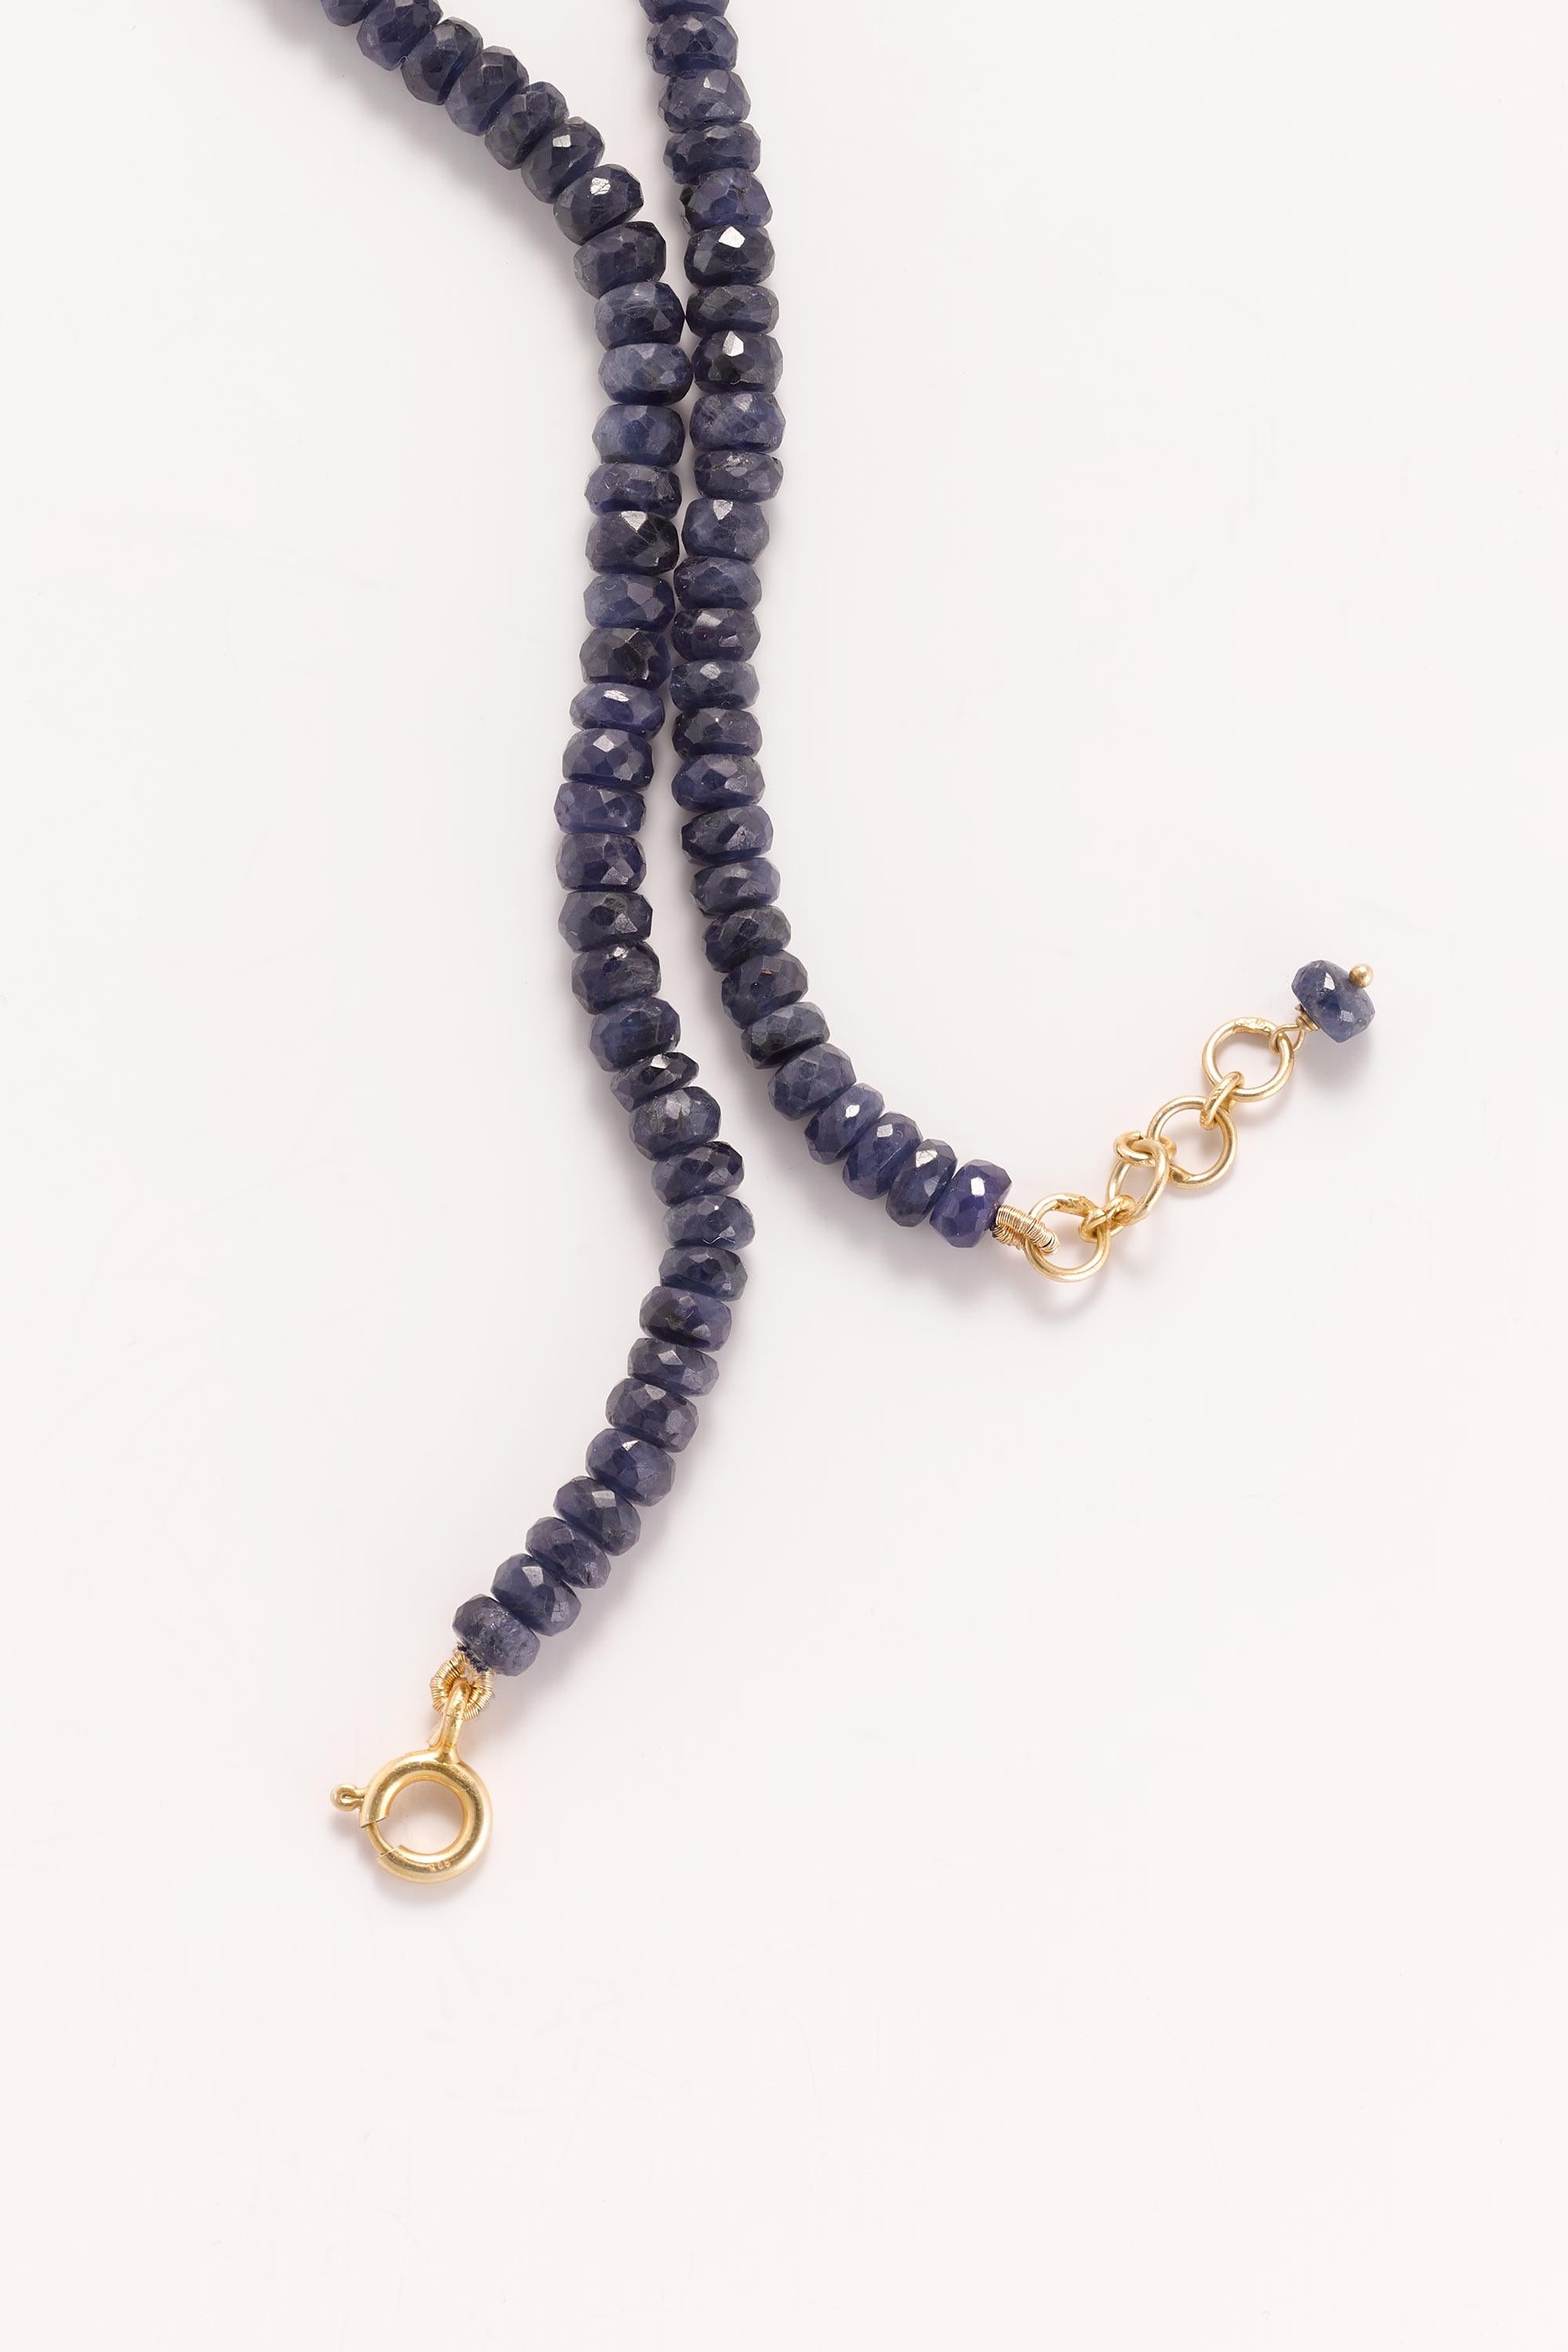 Sapphire and Kyanite 24K Gold Vermeil Pendant Necklace In Excellent Condition For Sale In New York, NY